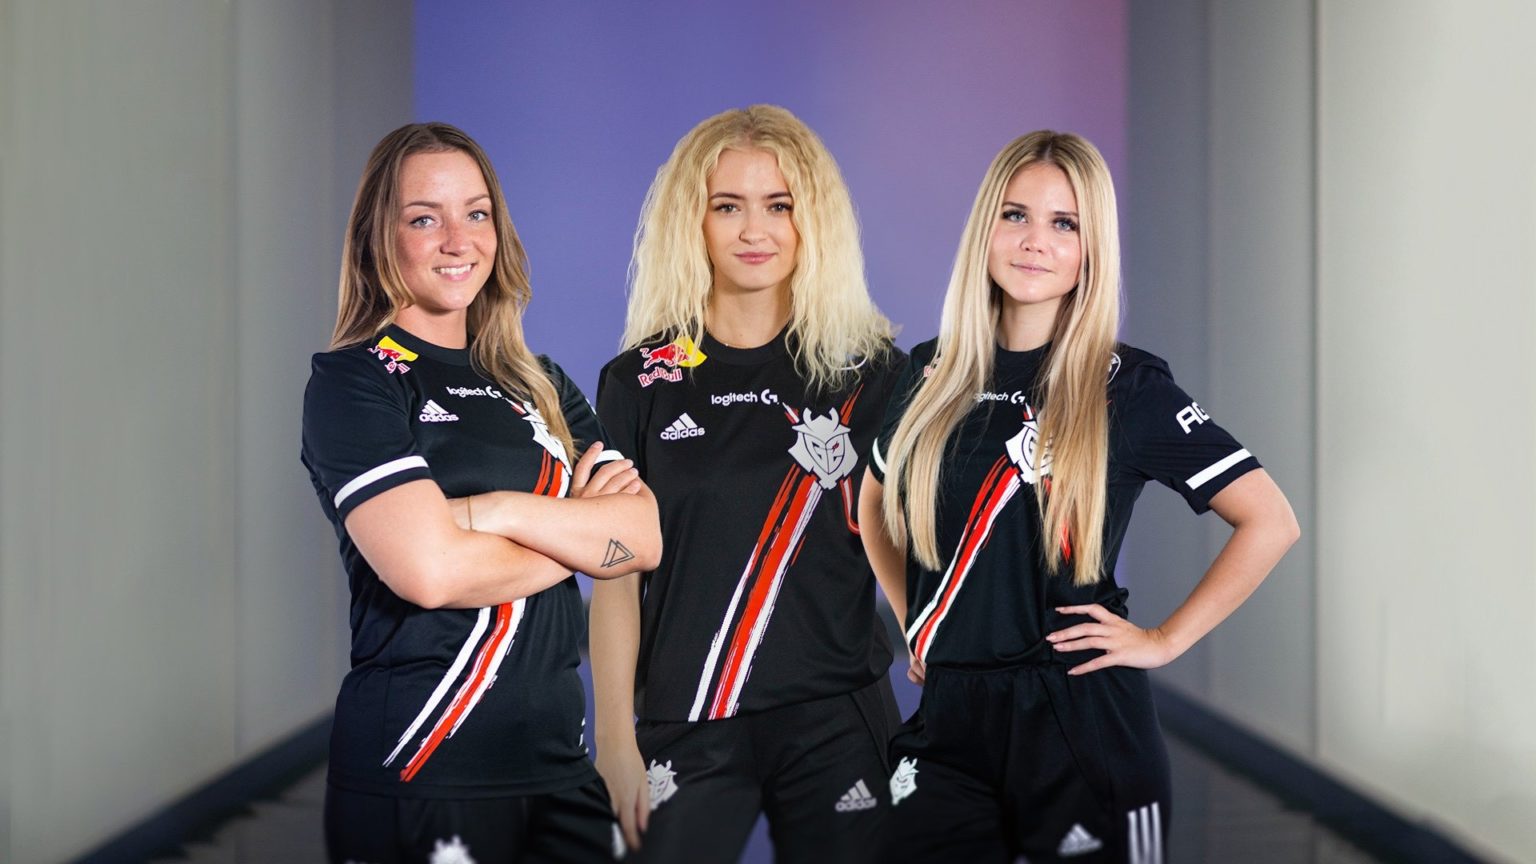 EMEA's most dominant women's VALORANT team clinches first spot at Game